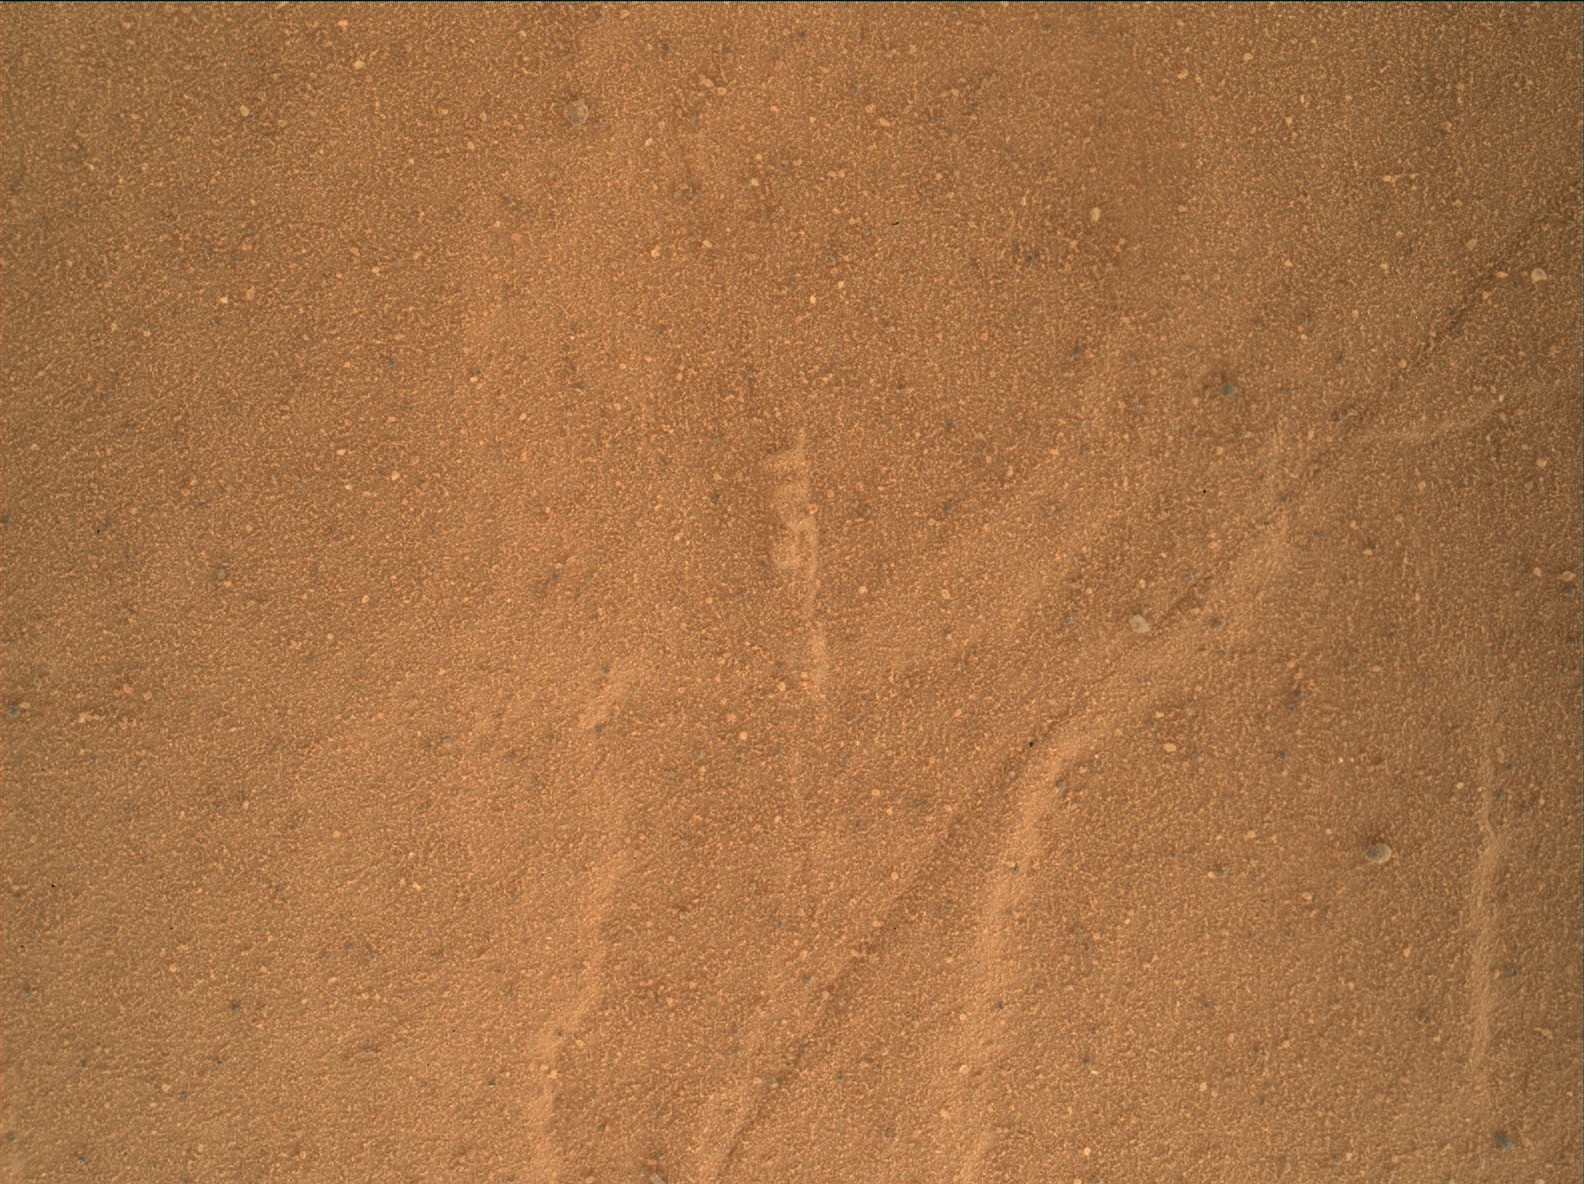 Nasa's Mars rover Curiosity acquired this image using its Mars Hand Lens Imager (MAHLI) on Sol 1791